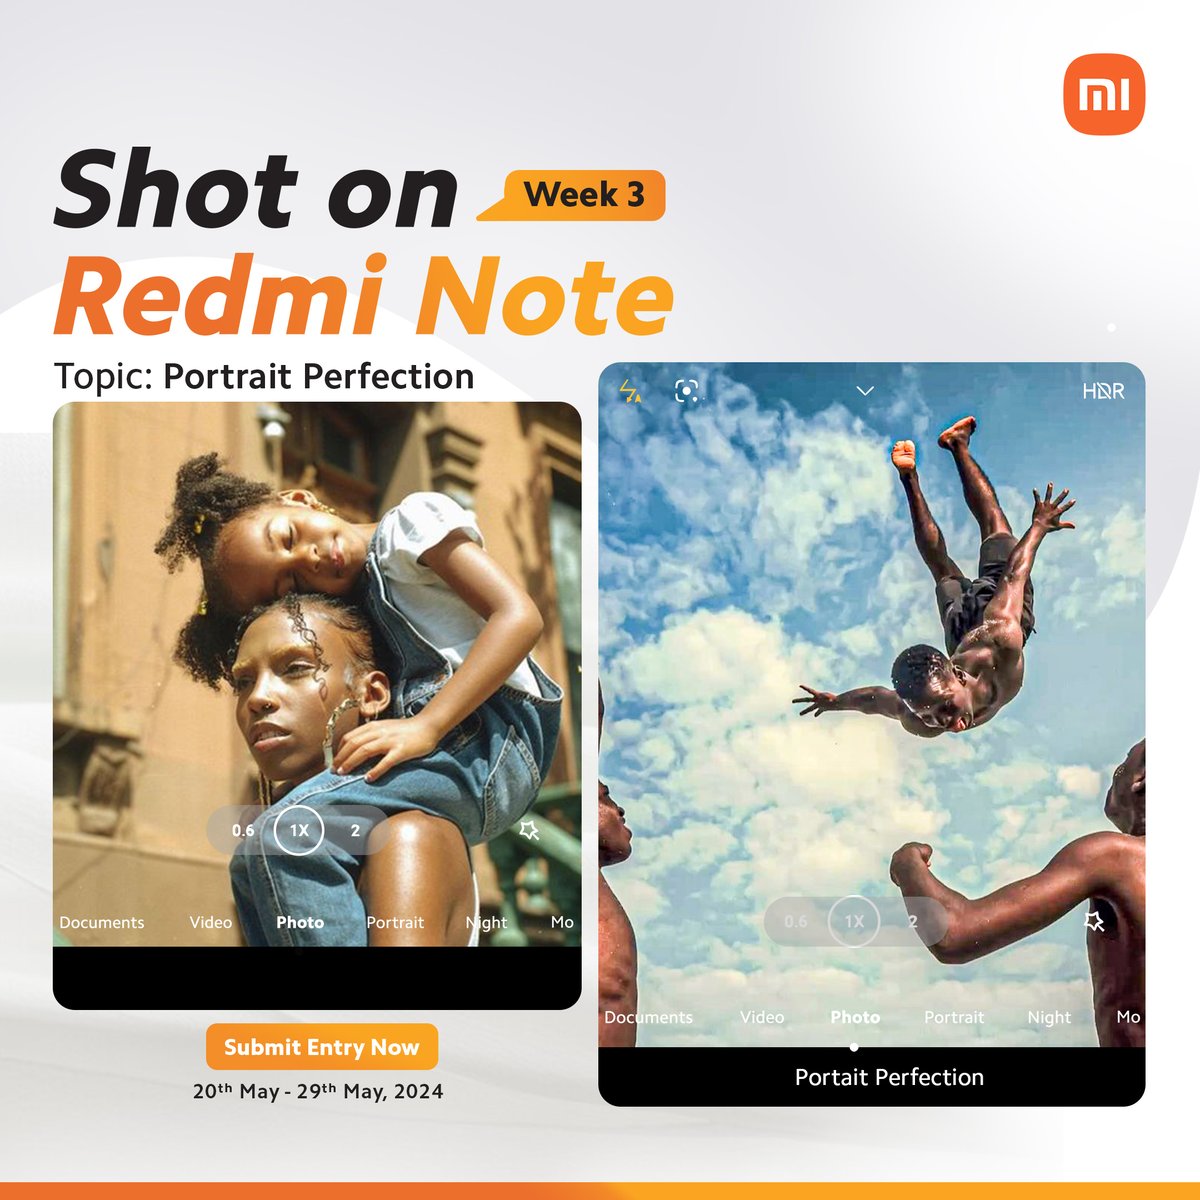 Week Three Theme: Portrait Perfection Show off your expertise in capturing stunning portraits with your Redmi Note camera! Whether it's a breathtaking close-up or captivating expression, let your creativity shine. Submit your entries from till May 29 and showcase your portrait